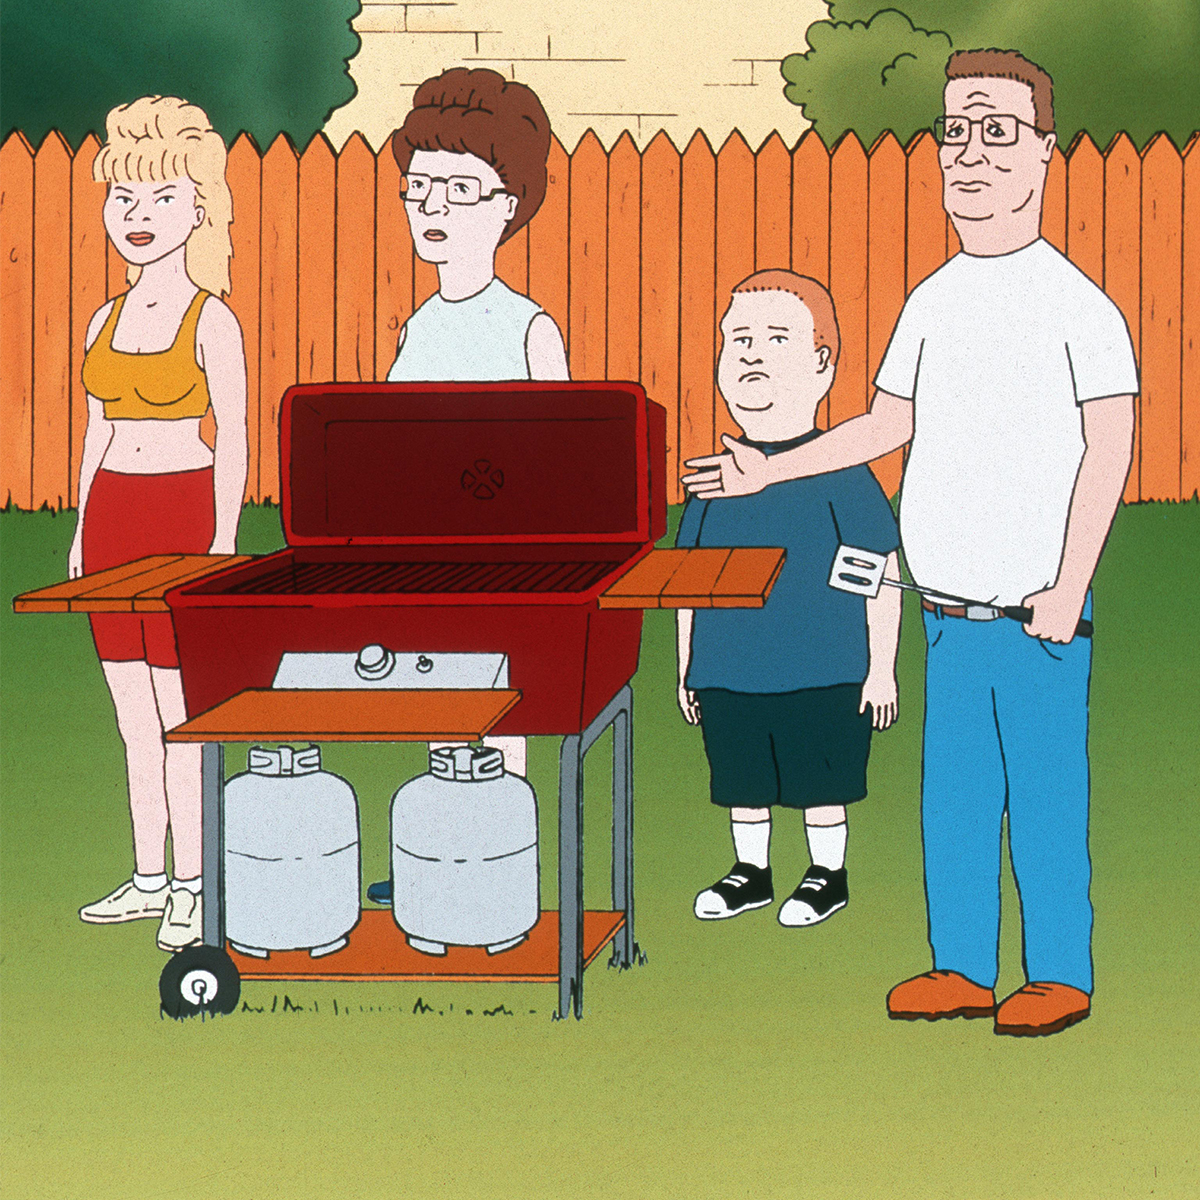 10 Best 'King of the Hill' Episodes: Rewatch Now Before the Revival